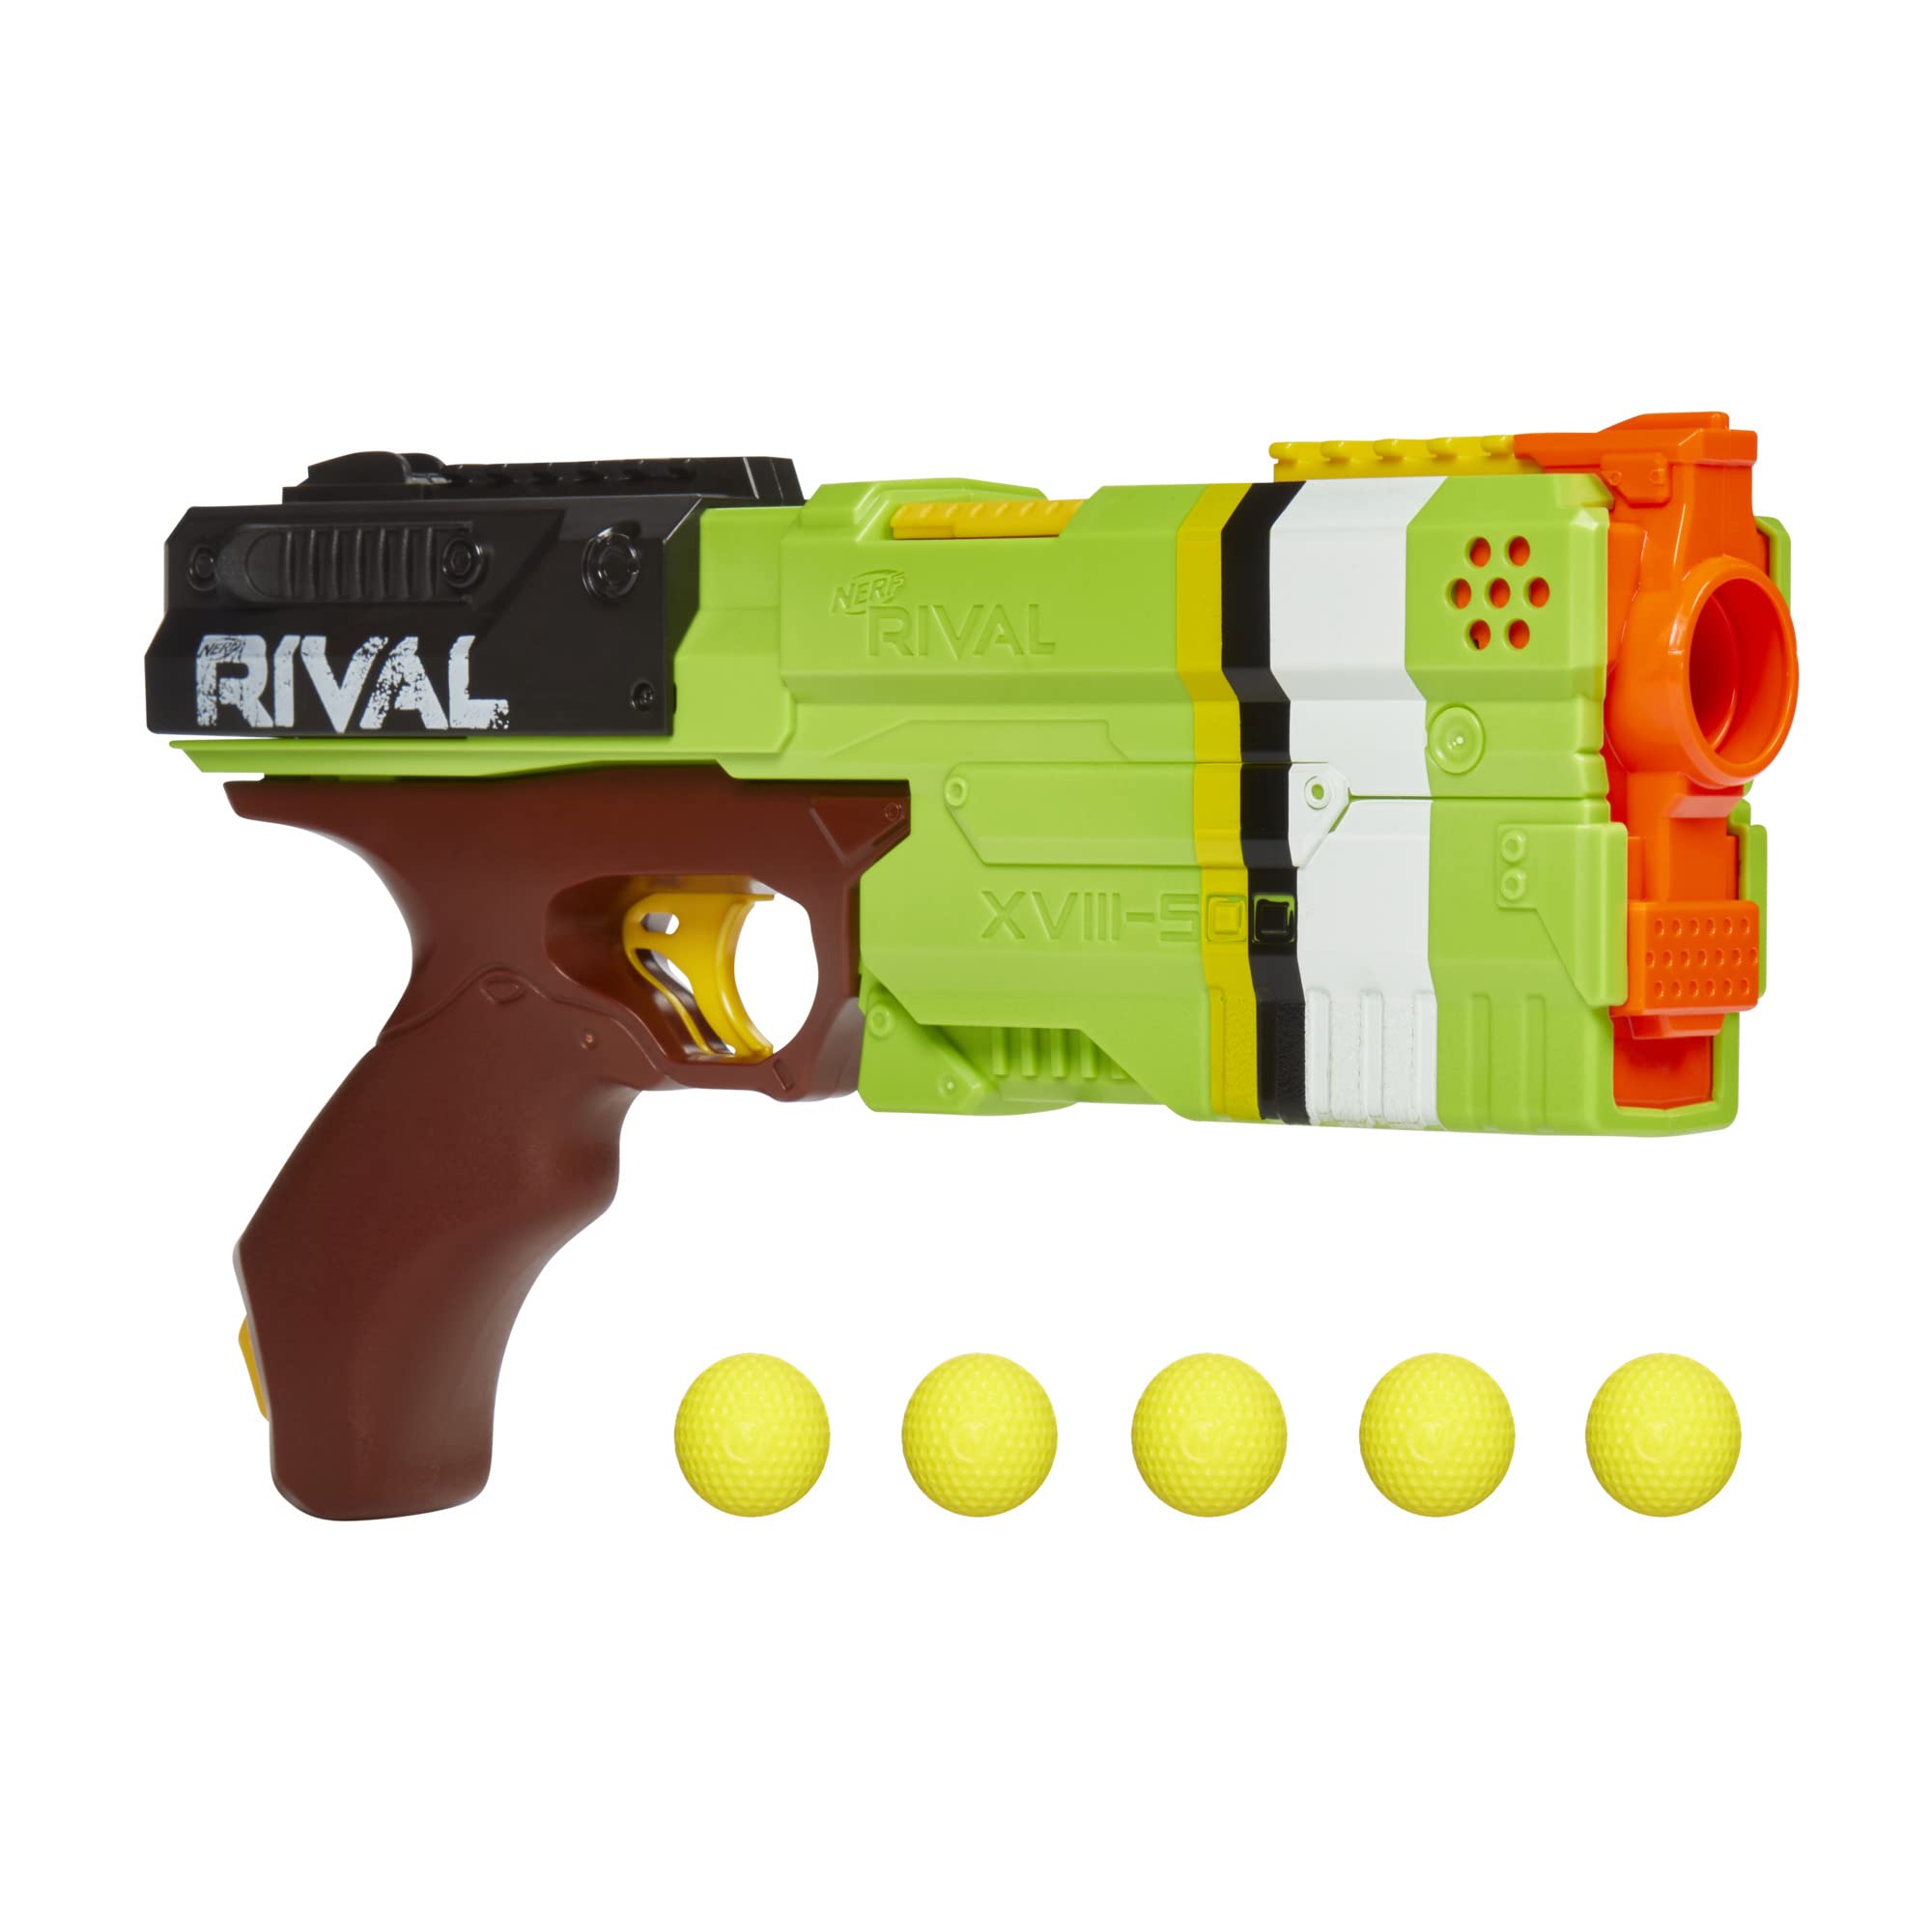 Nerf Rivals: Kronos XVIII-500 Blaster (Green) $7.28 + Free Shipping w/ Prime or on orders over $35